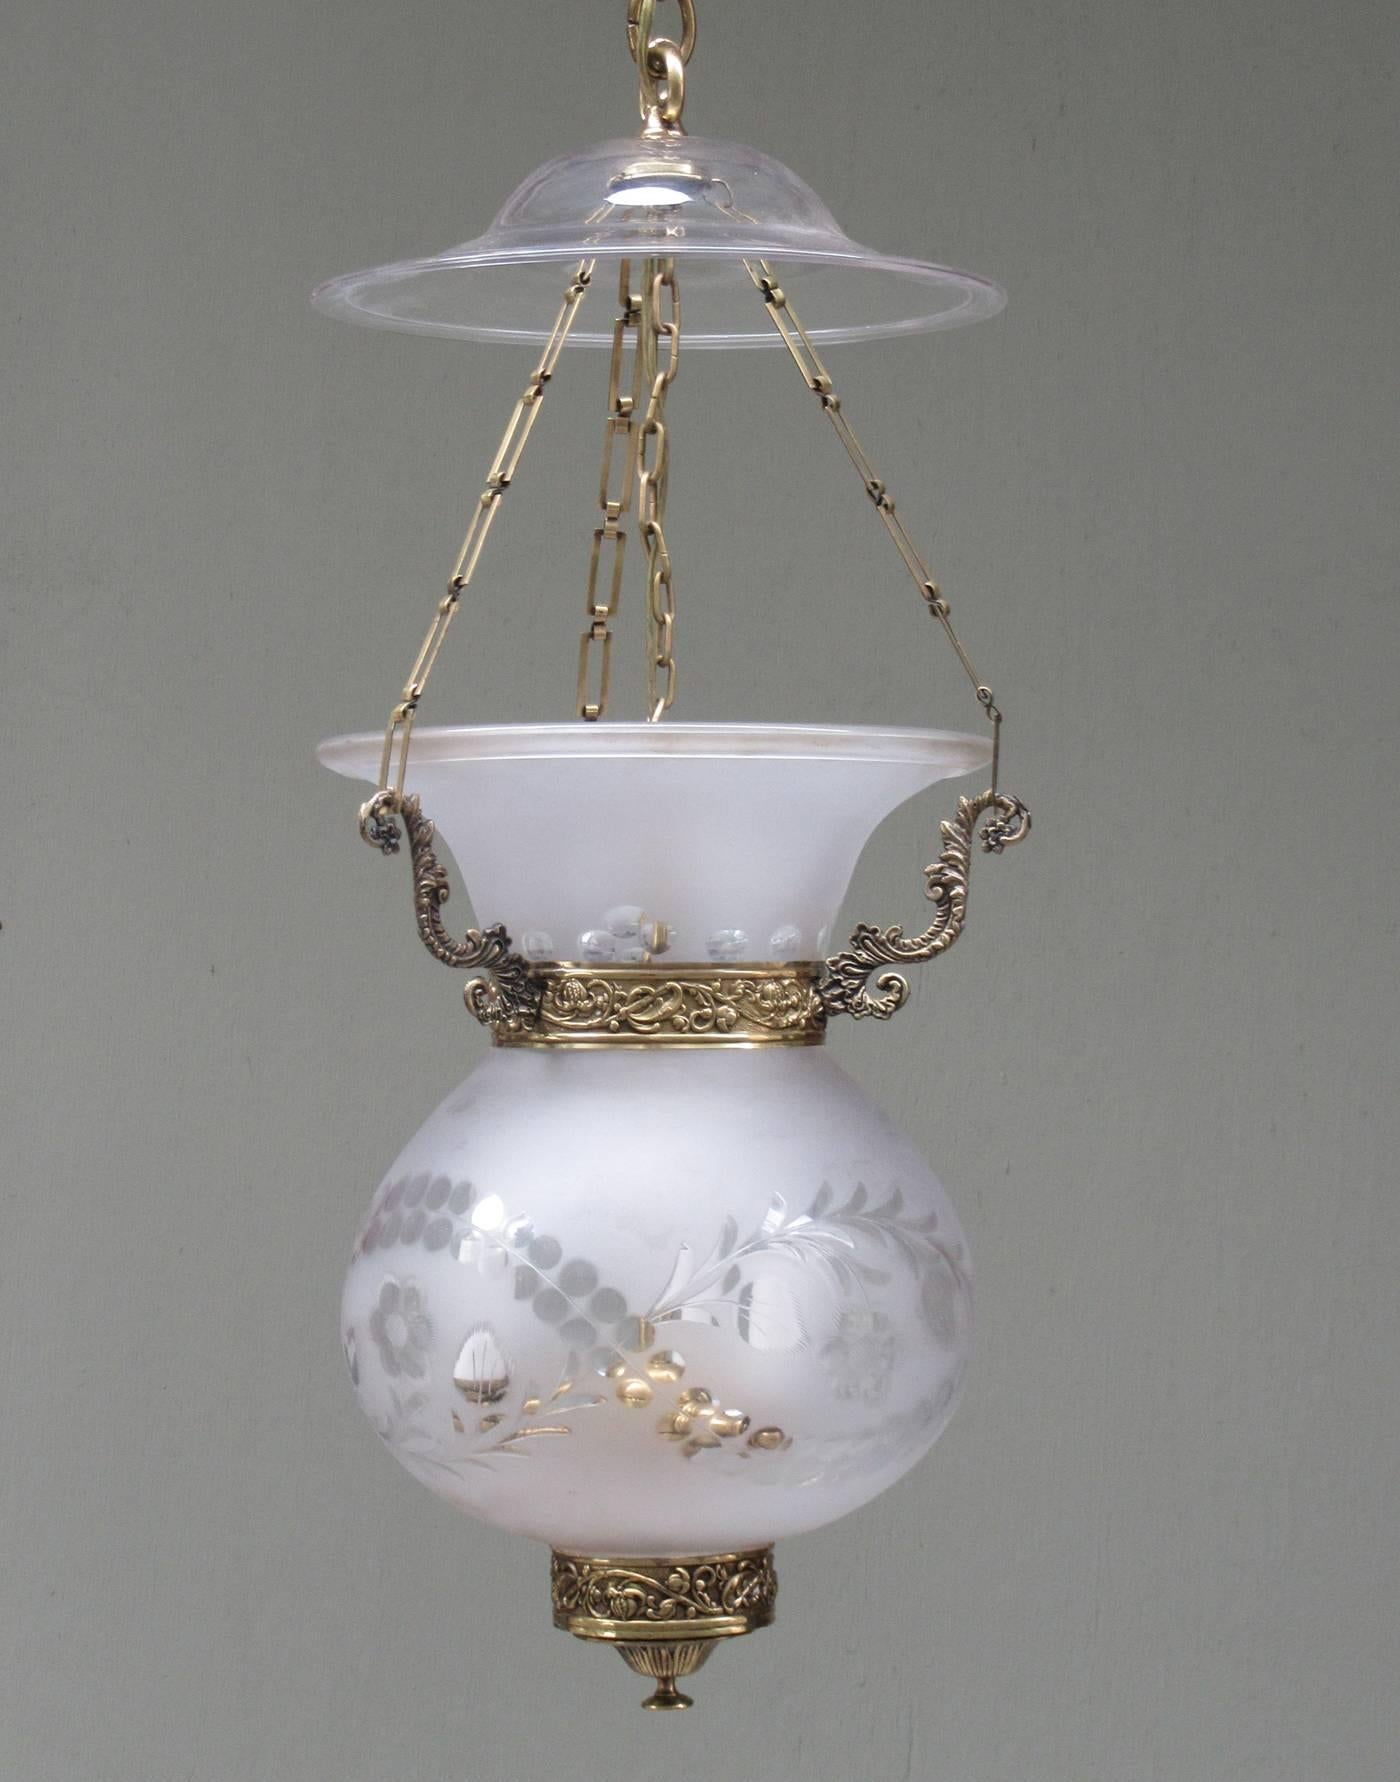 An early 19th century English Regency frosted glass bell jar lantern with brass, circa 1830, featuring floral etchings, three pendant drop and smoke bell. The bell jar alone measures 14